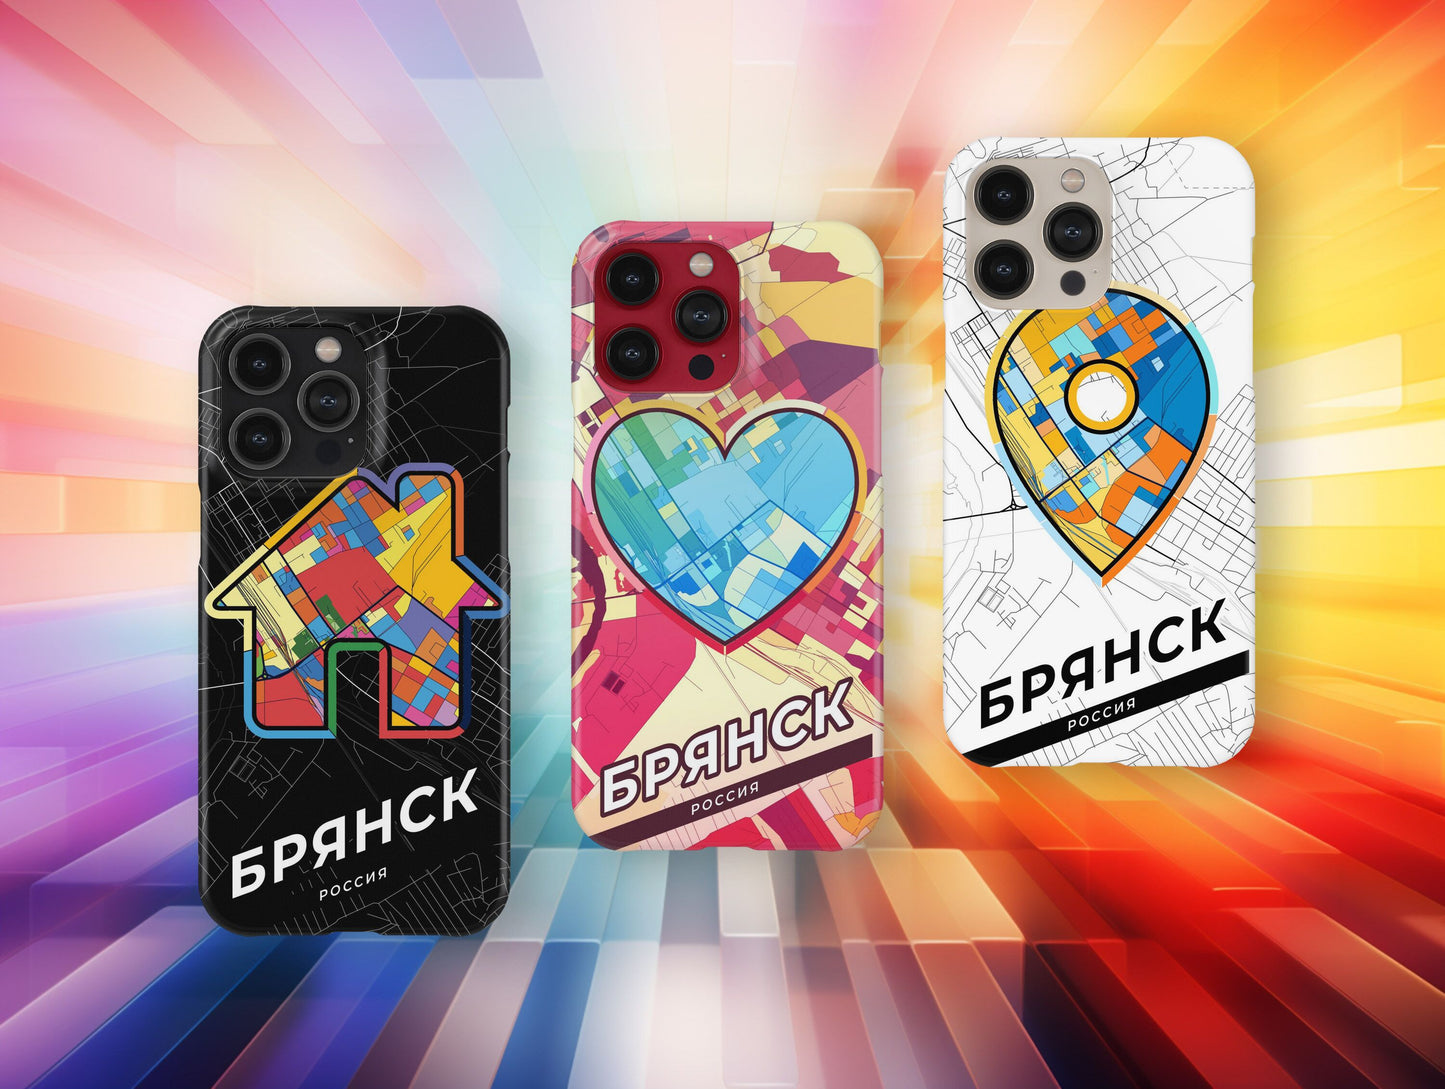 Bryansk Russia slim phone case with colorful icon. Birthday, wedding or housewarming gift. Couple match cases.